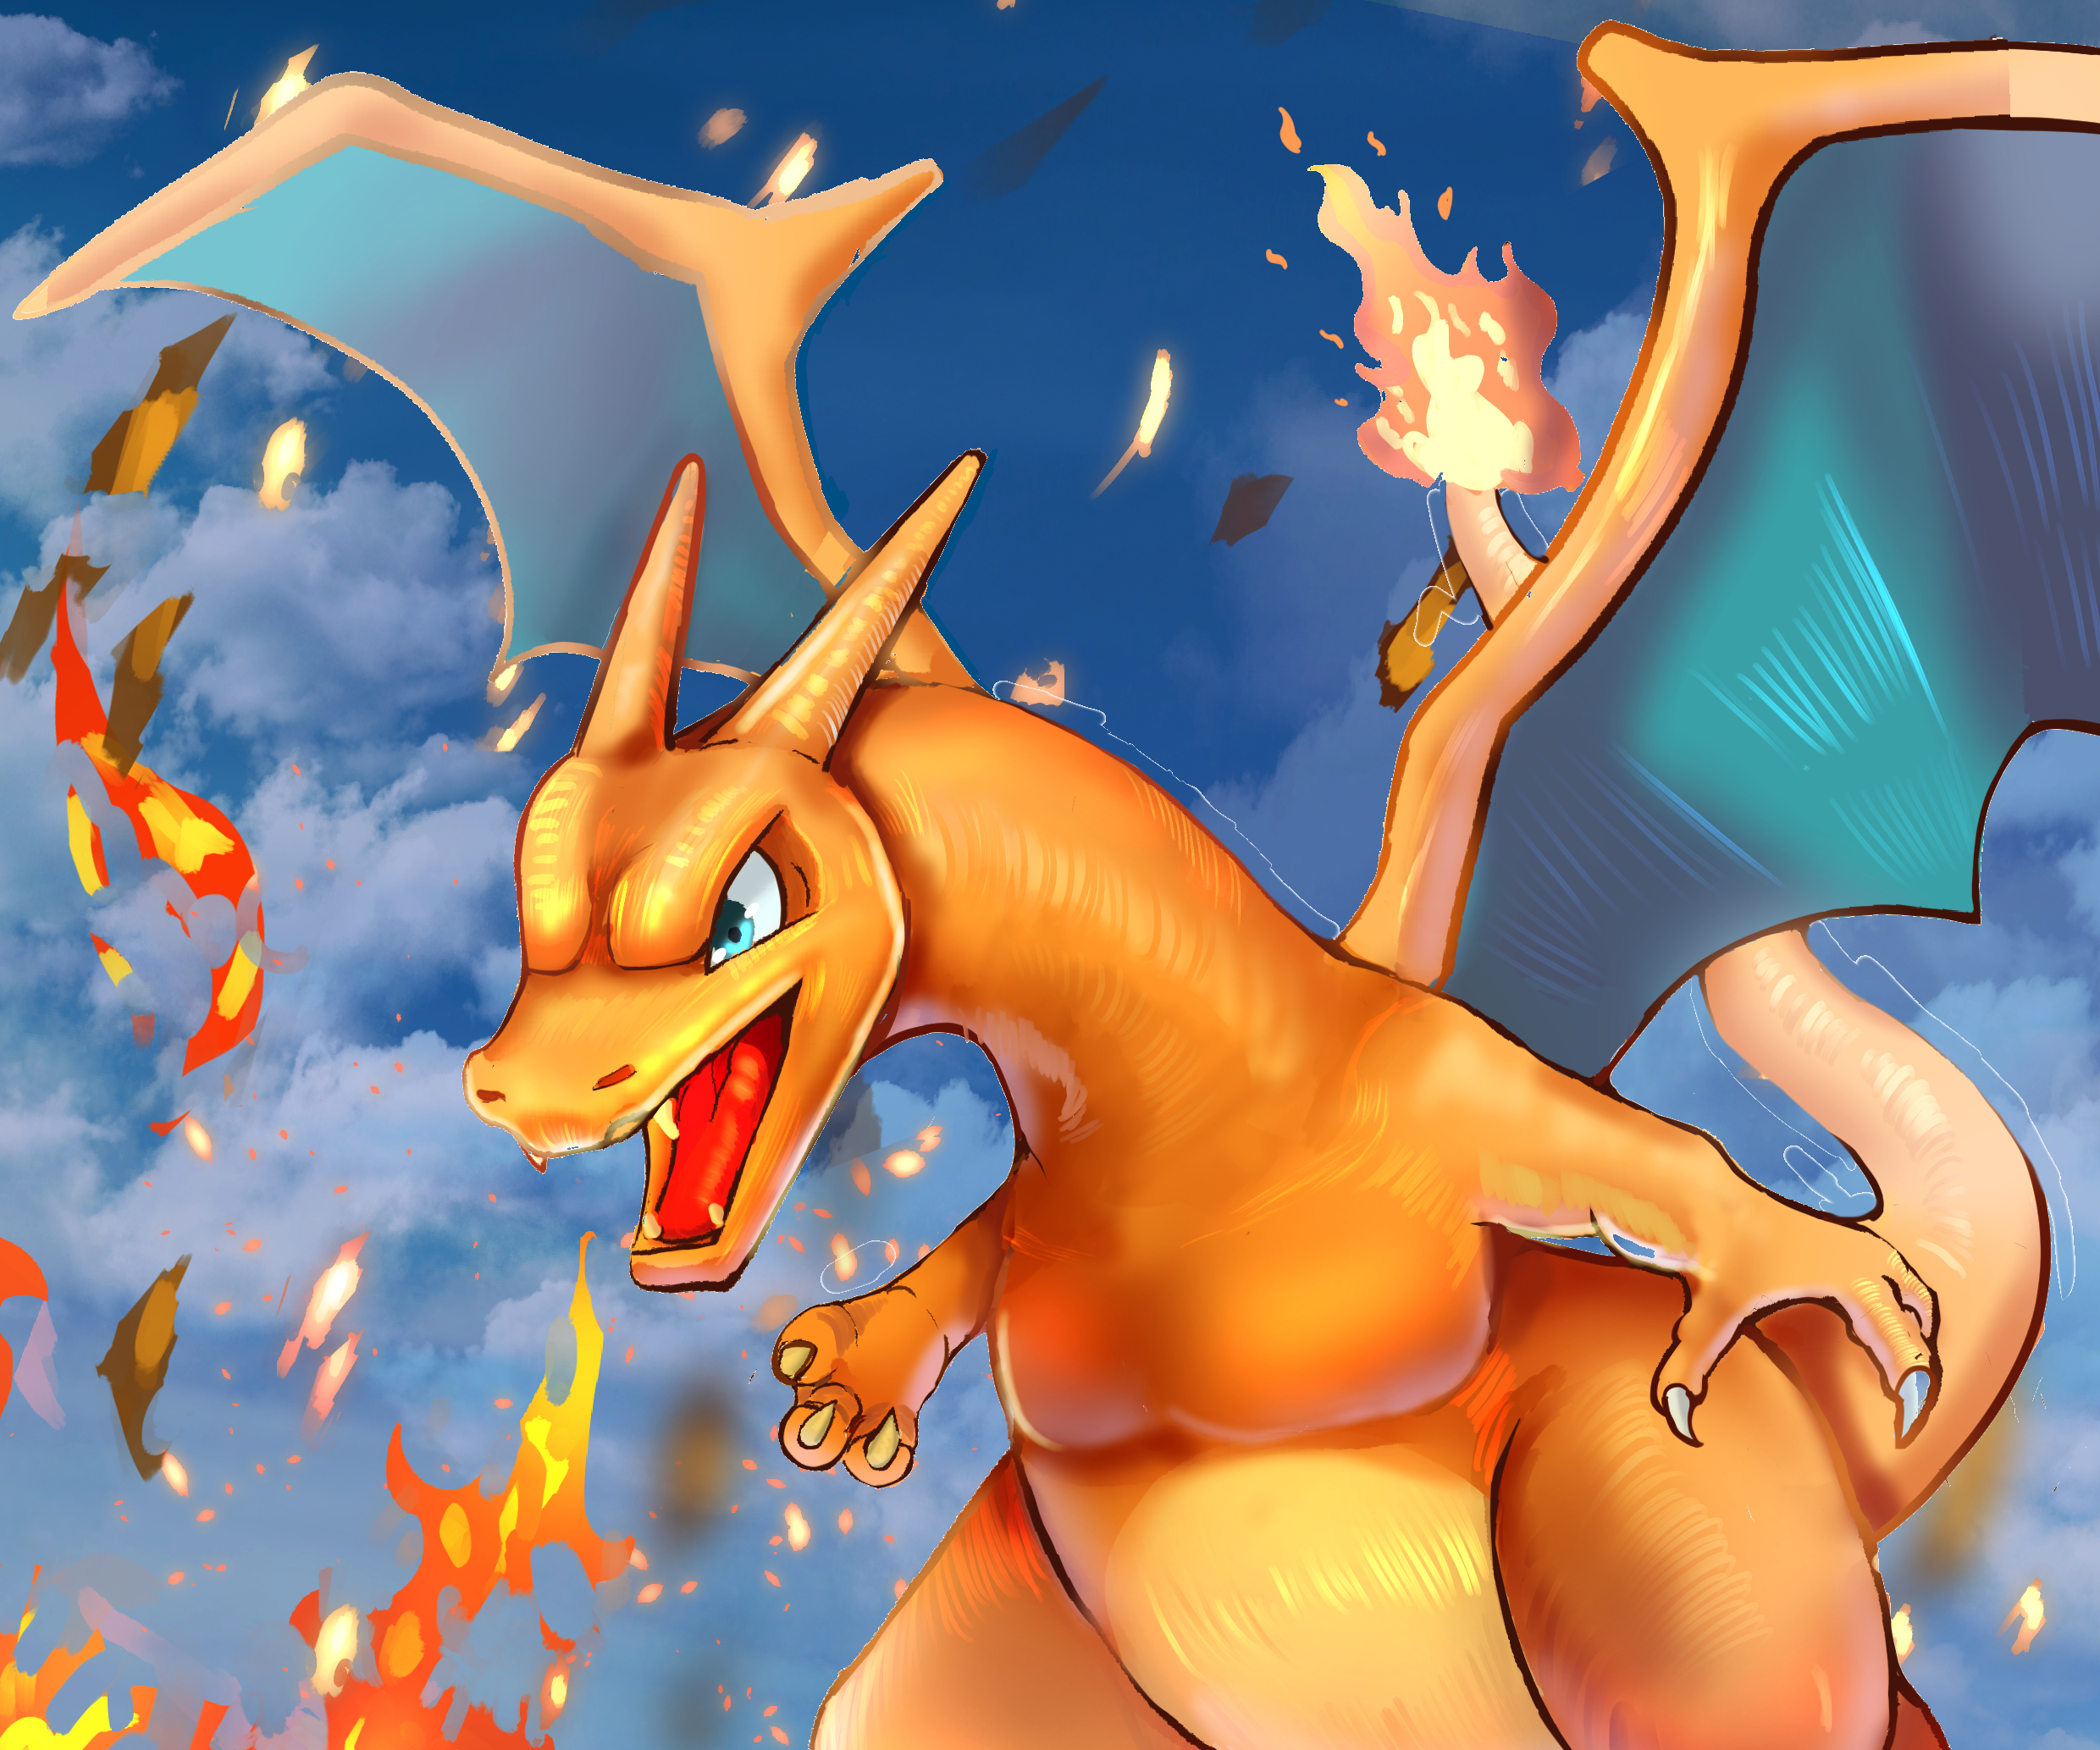 Charizard Background 68 images